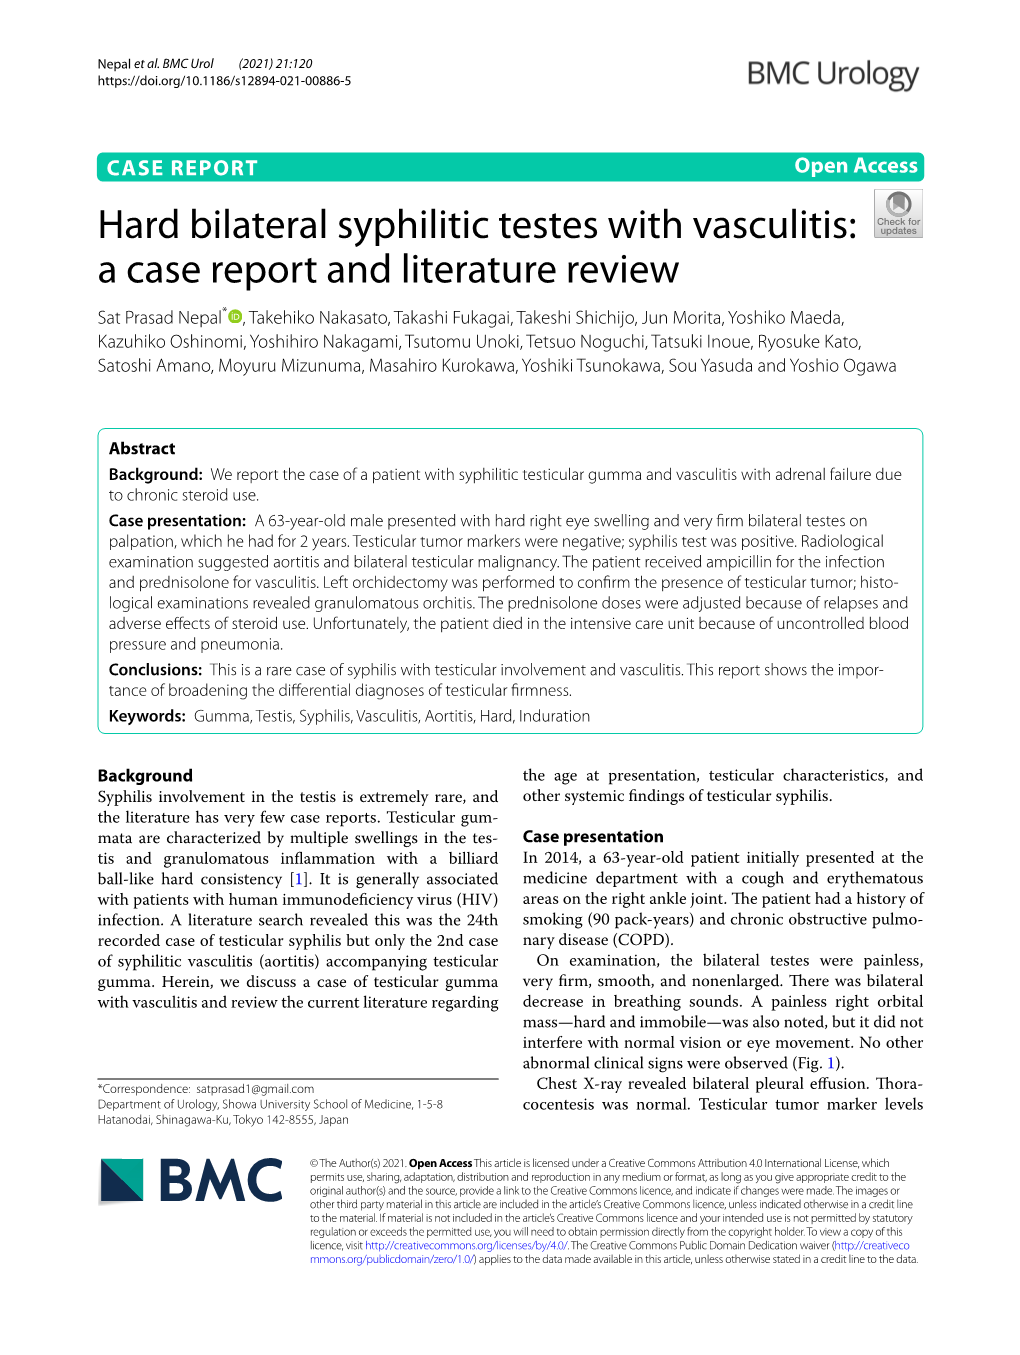 Hard Bilateral Syphilitic Testes with Vasculitis